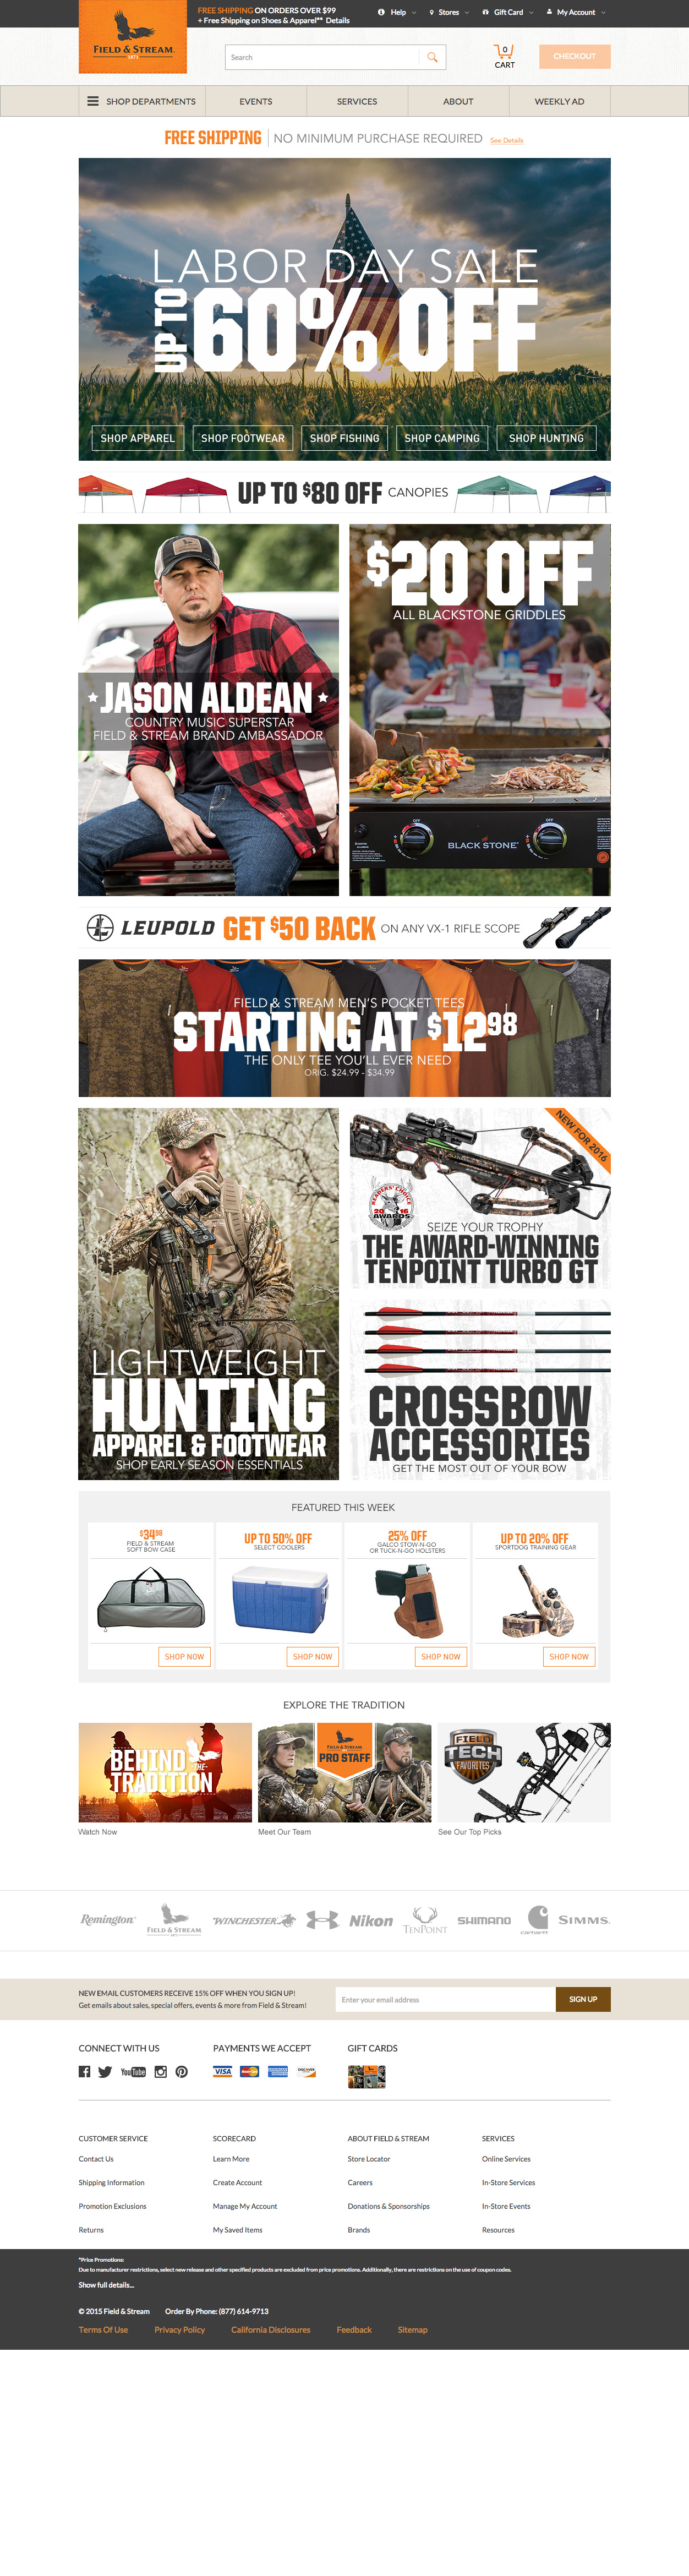 Field and Stream Shop image